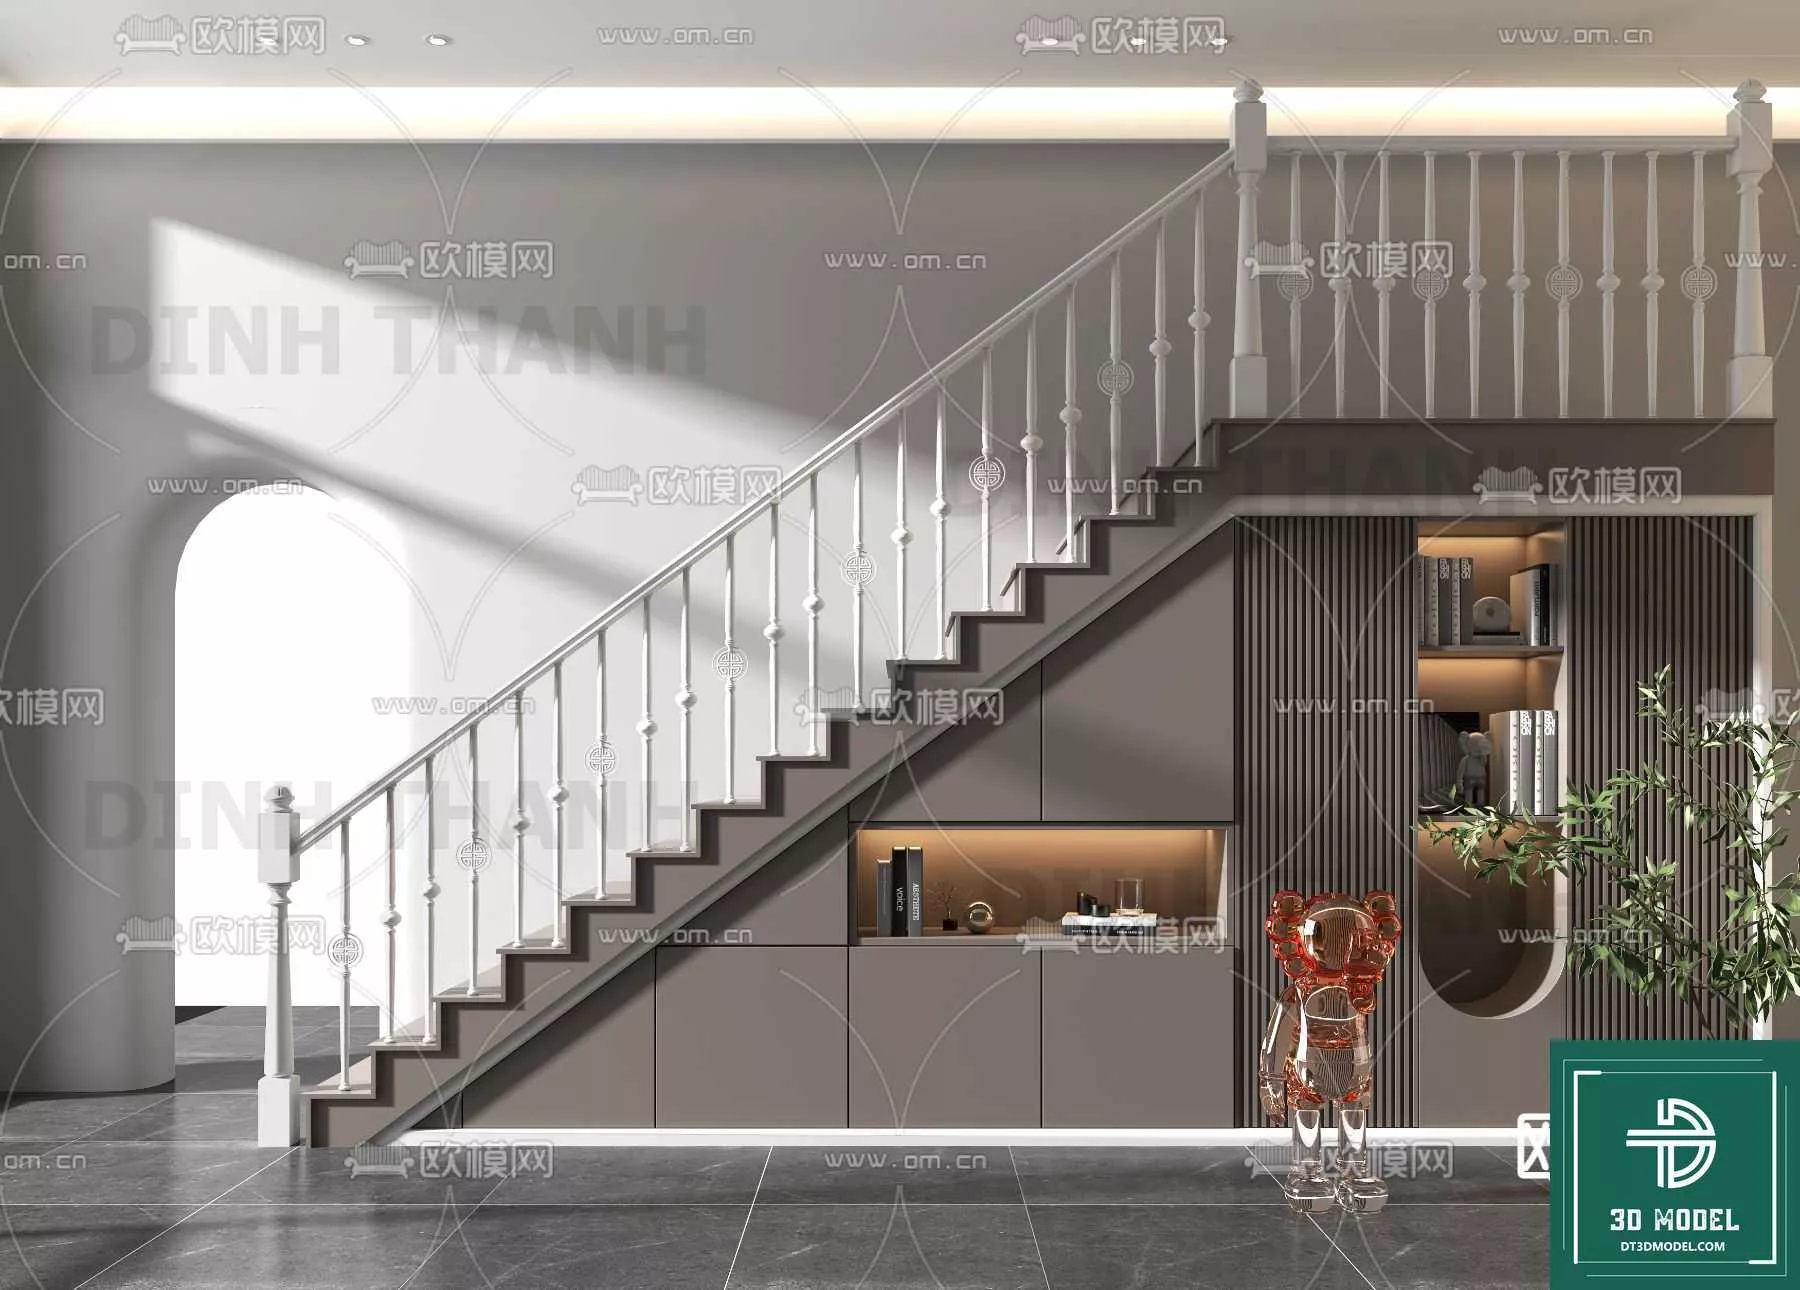 MODERN STAIR - SKETCHUP 3D MODEL - VRAY OR ENSCAPE - ID14140